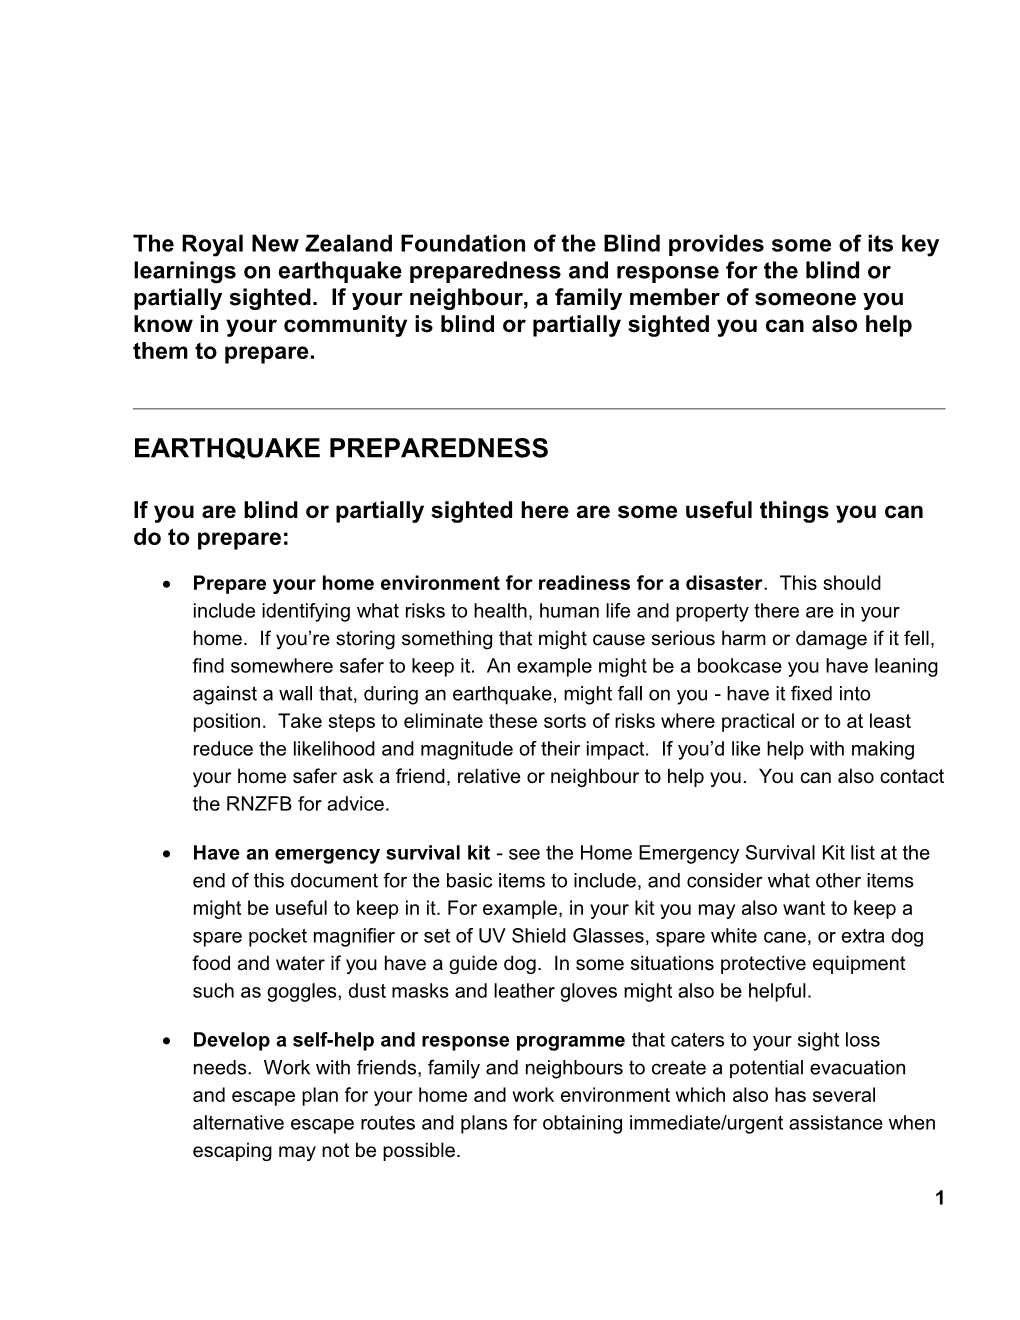 The Royal New Zealand Foundation of the Blind Provides Some of Its Key Learnings on Earthquake